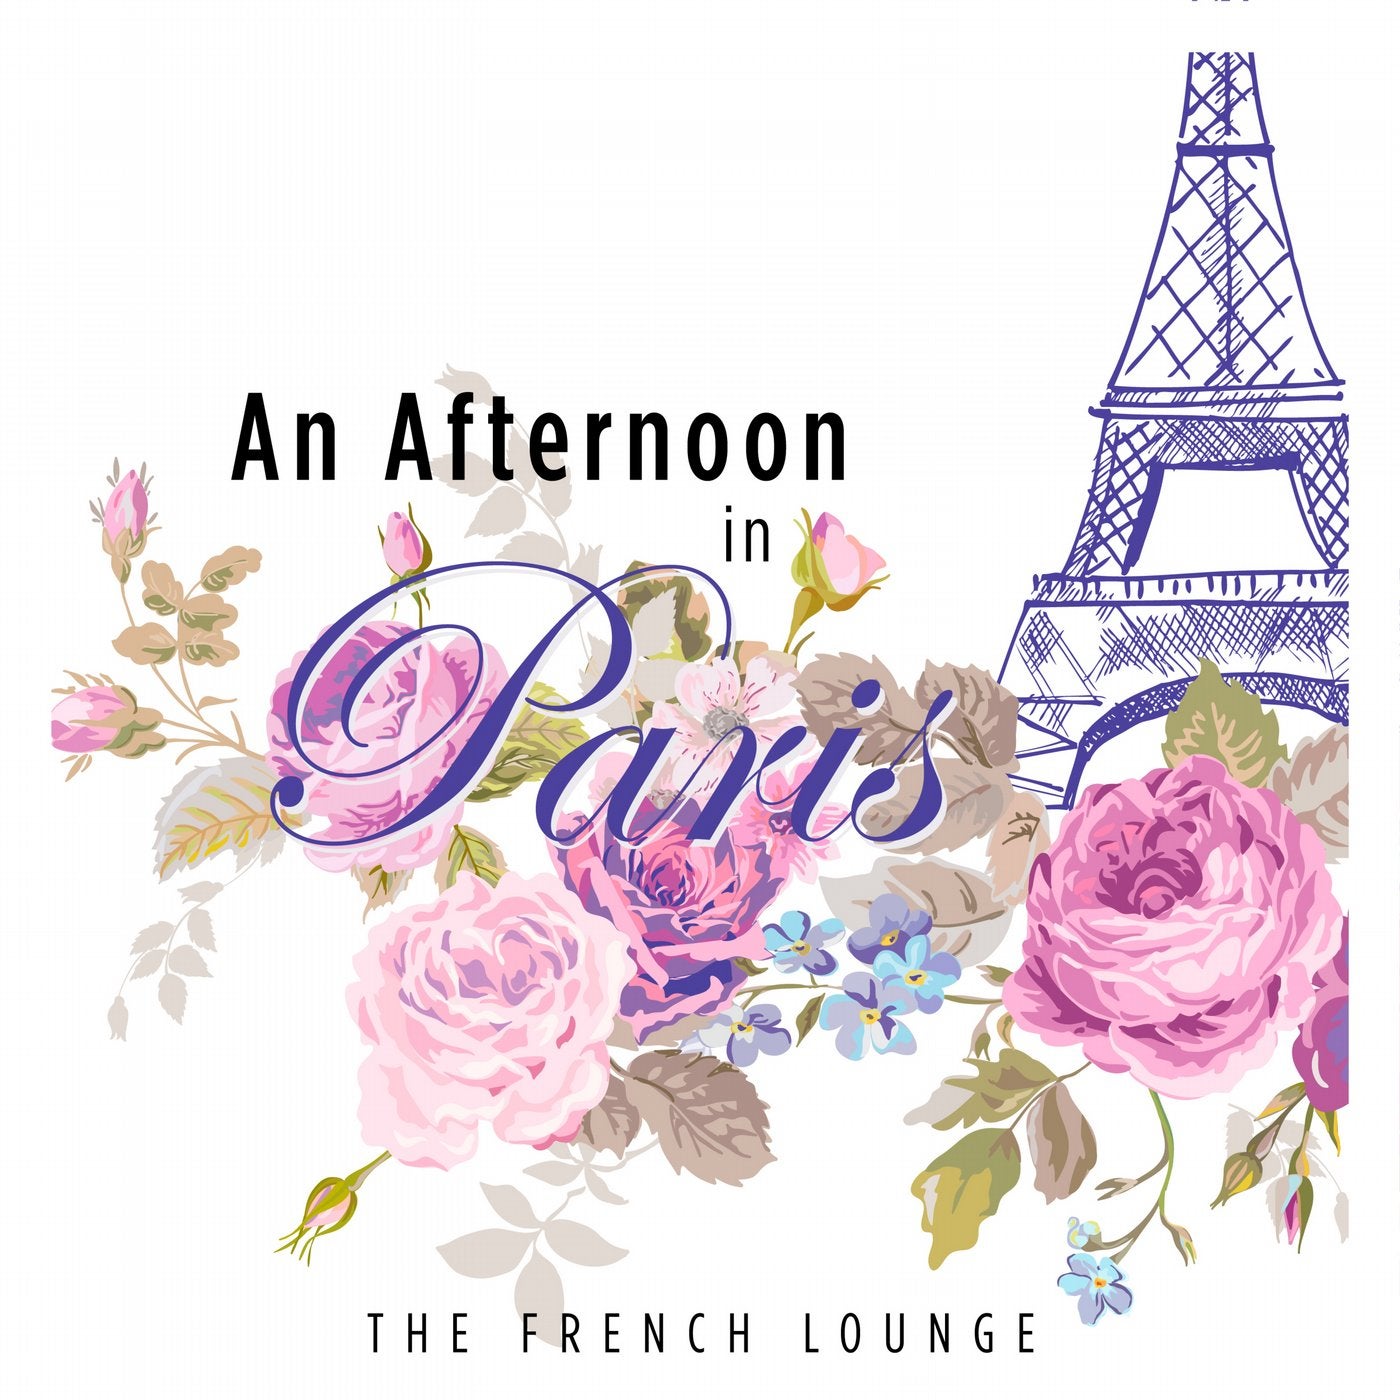 Париж аудирование. Французский Lounge. Afternoon in Paris Ноты. The Paris sisters. An afternoon out